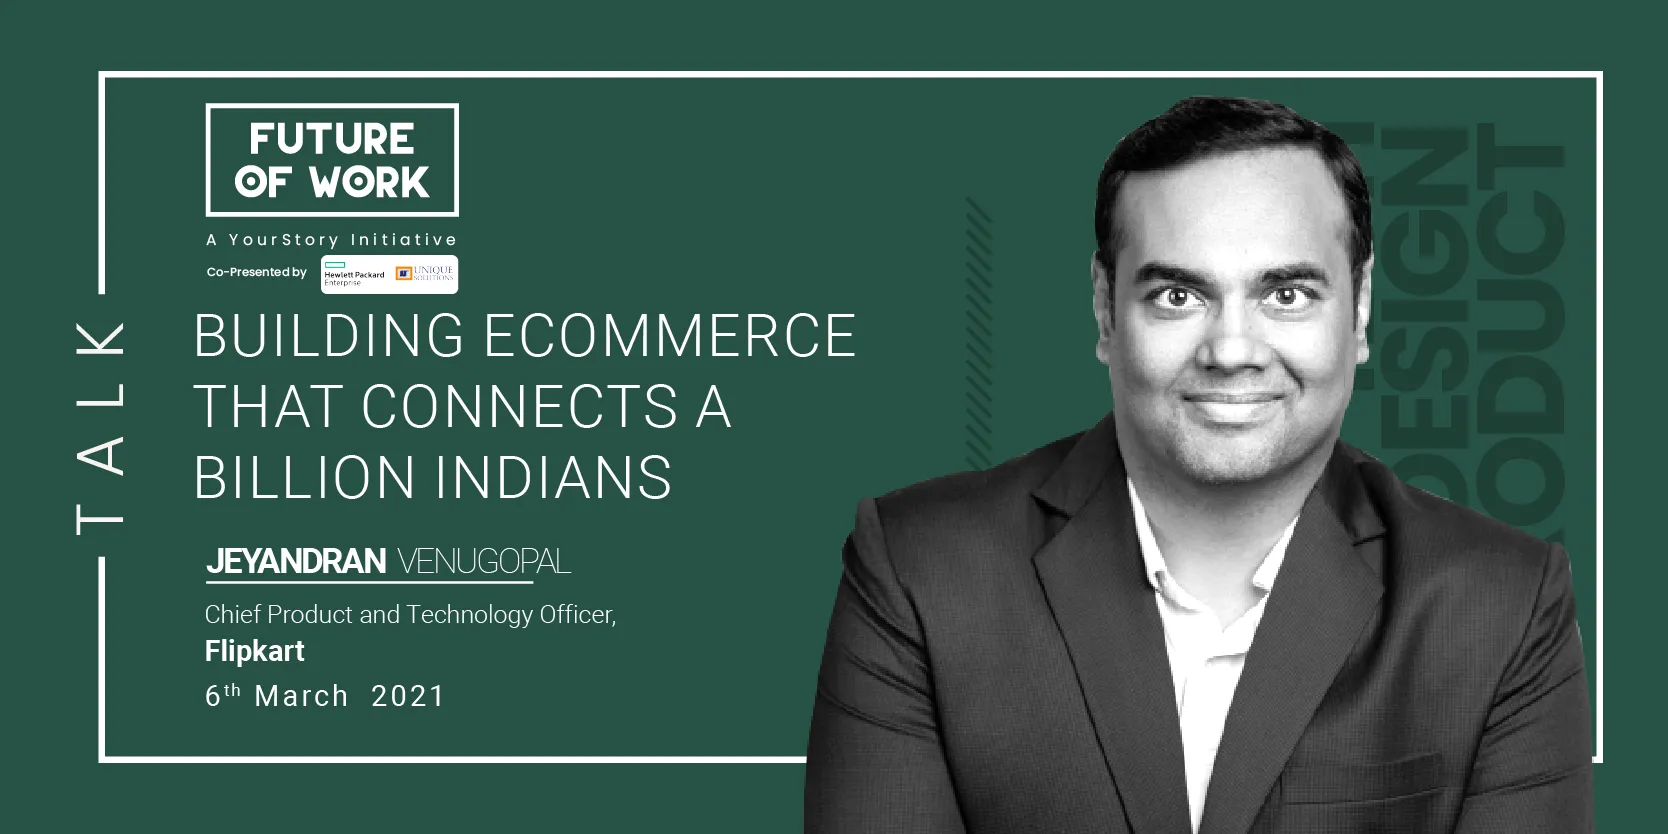 future-of-work-flipkart-to-leverage-new-age-tech-to-onboard-more-indians-on-the-ecommerce-platform